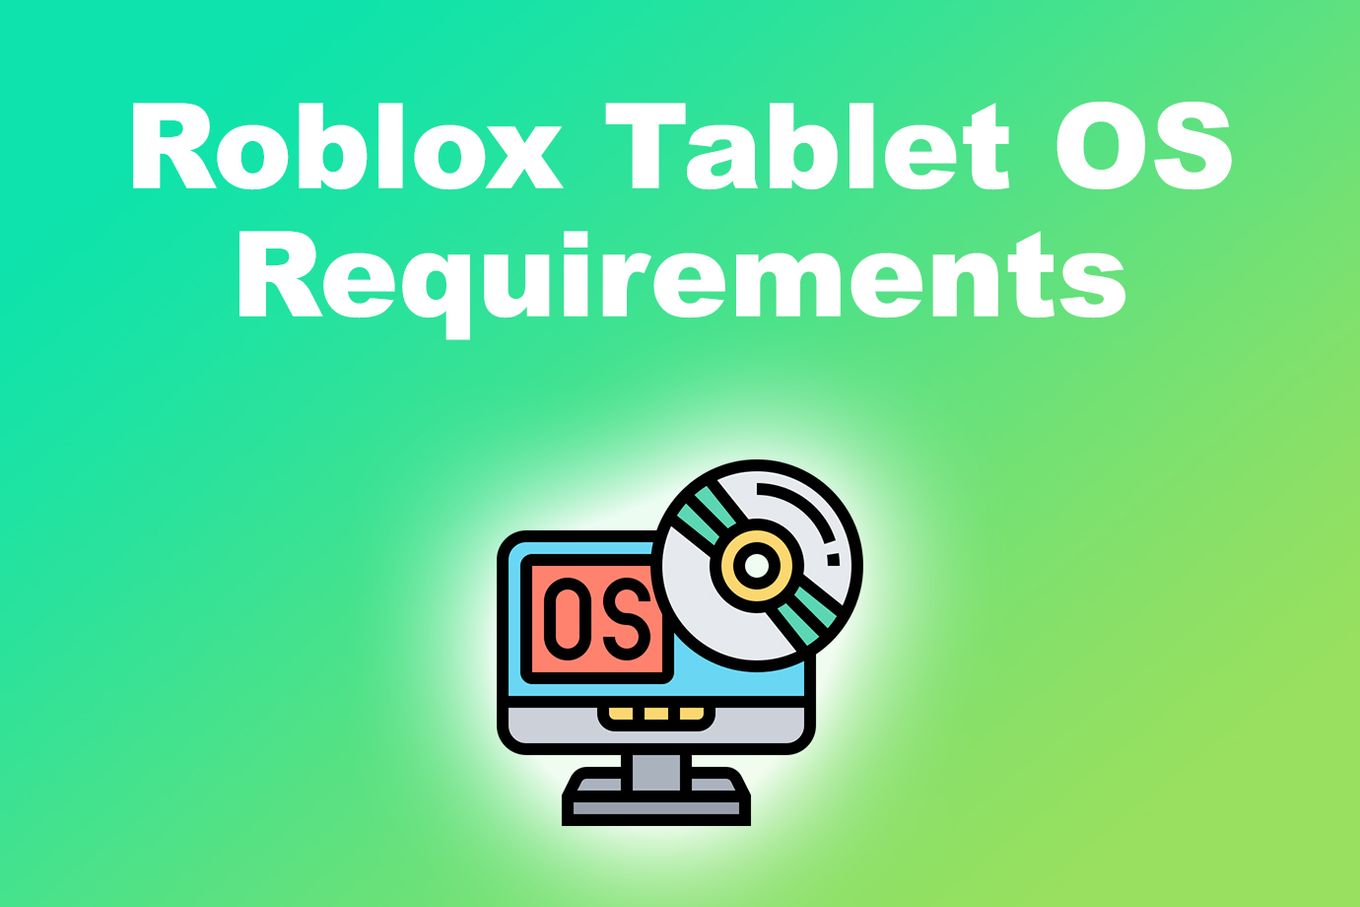 Roblox Tablet OS Requirements